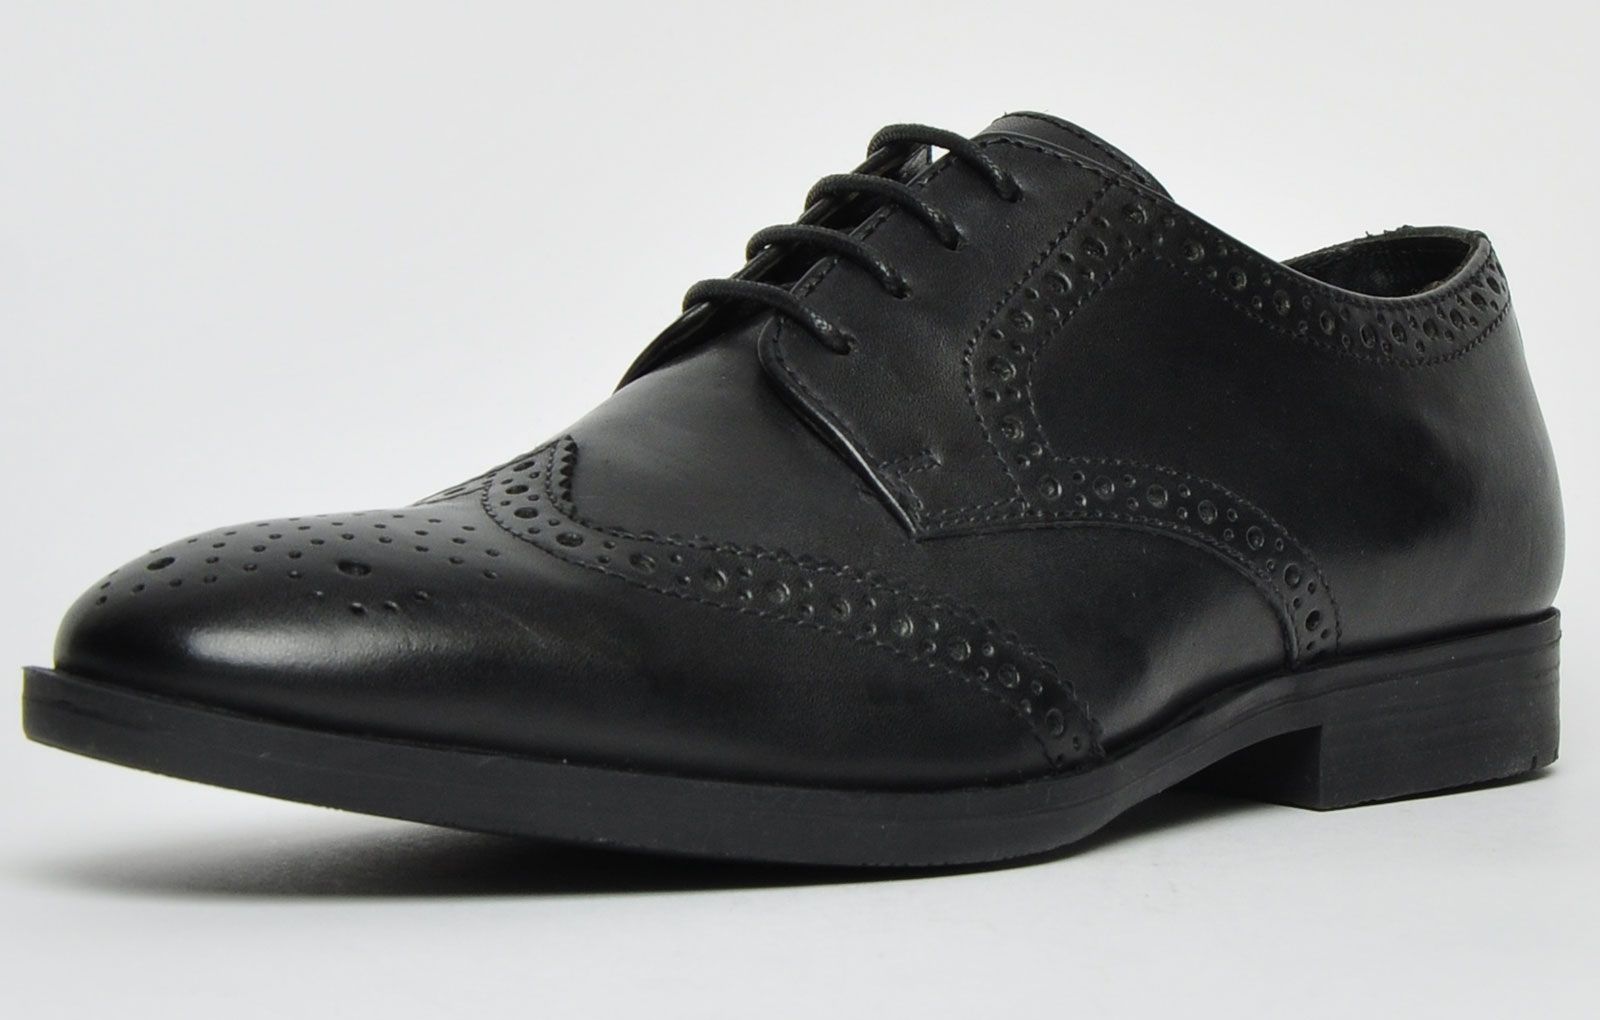 These premium leather Windsor formal brogue shoes from Ikon are perfect for any smart occasion. With intricate brogue detailing and a soft leather design, the Windsor oozes a highly fashionable, comfortable look, perfect for off duty days and smarter style. <p>Featuring a four eyelet lace up system and a sturdy heel, these shoes are the definition of sophistication for men that can move seamlessly between a professional wardrobe to a casual ensemble.</p> <p><b> </b></p> <p style=